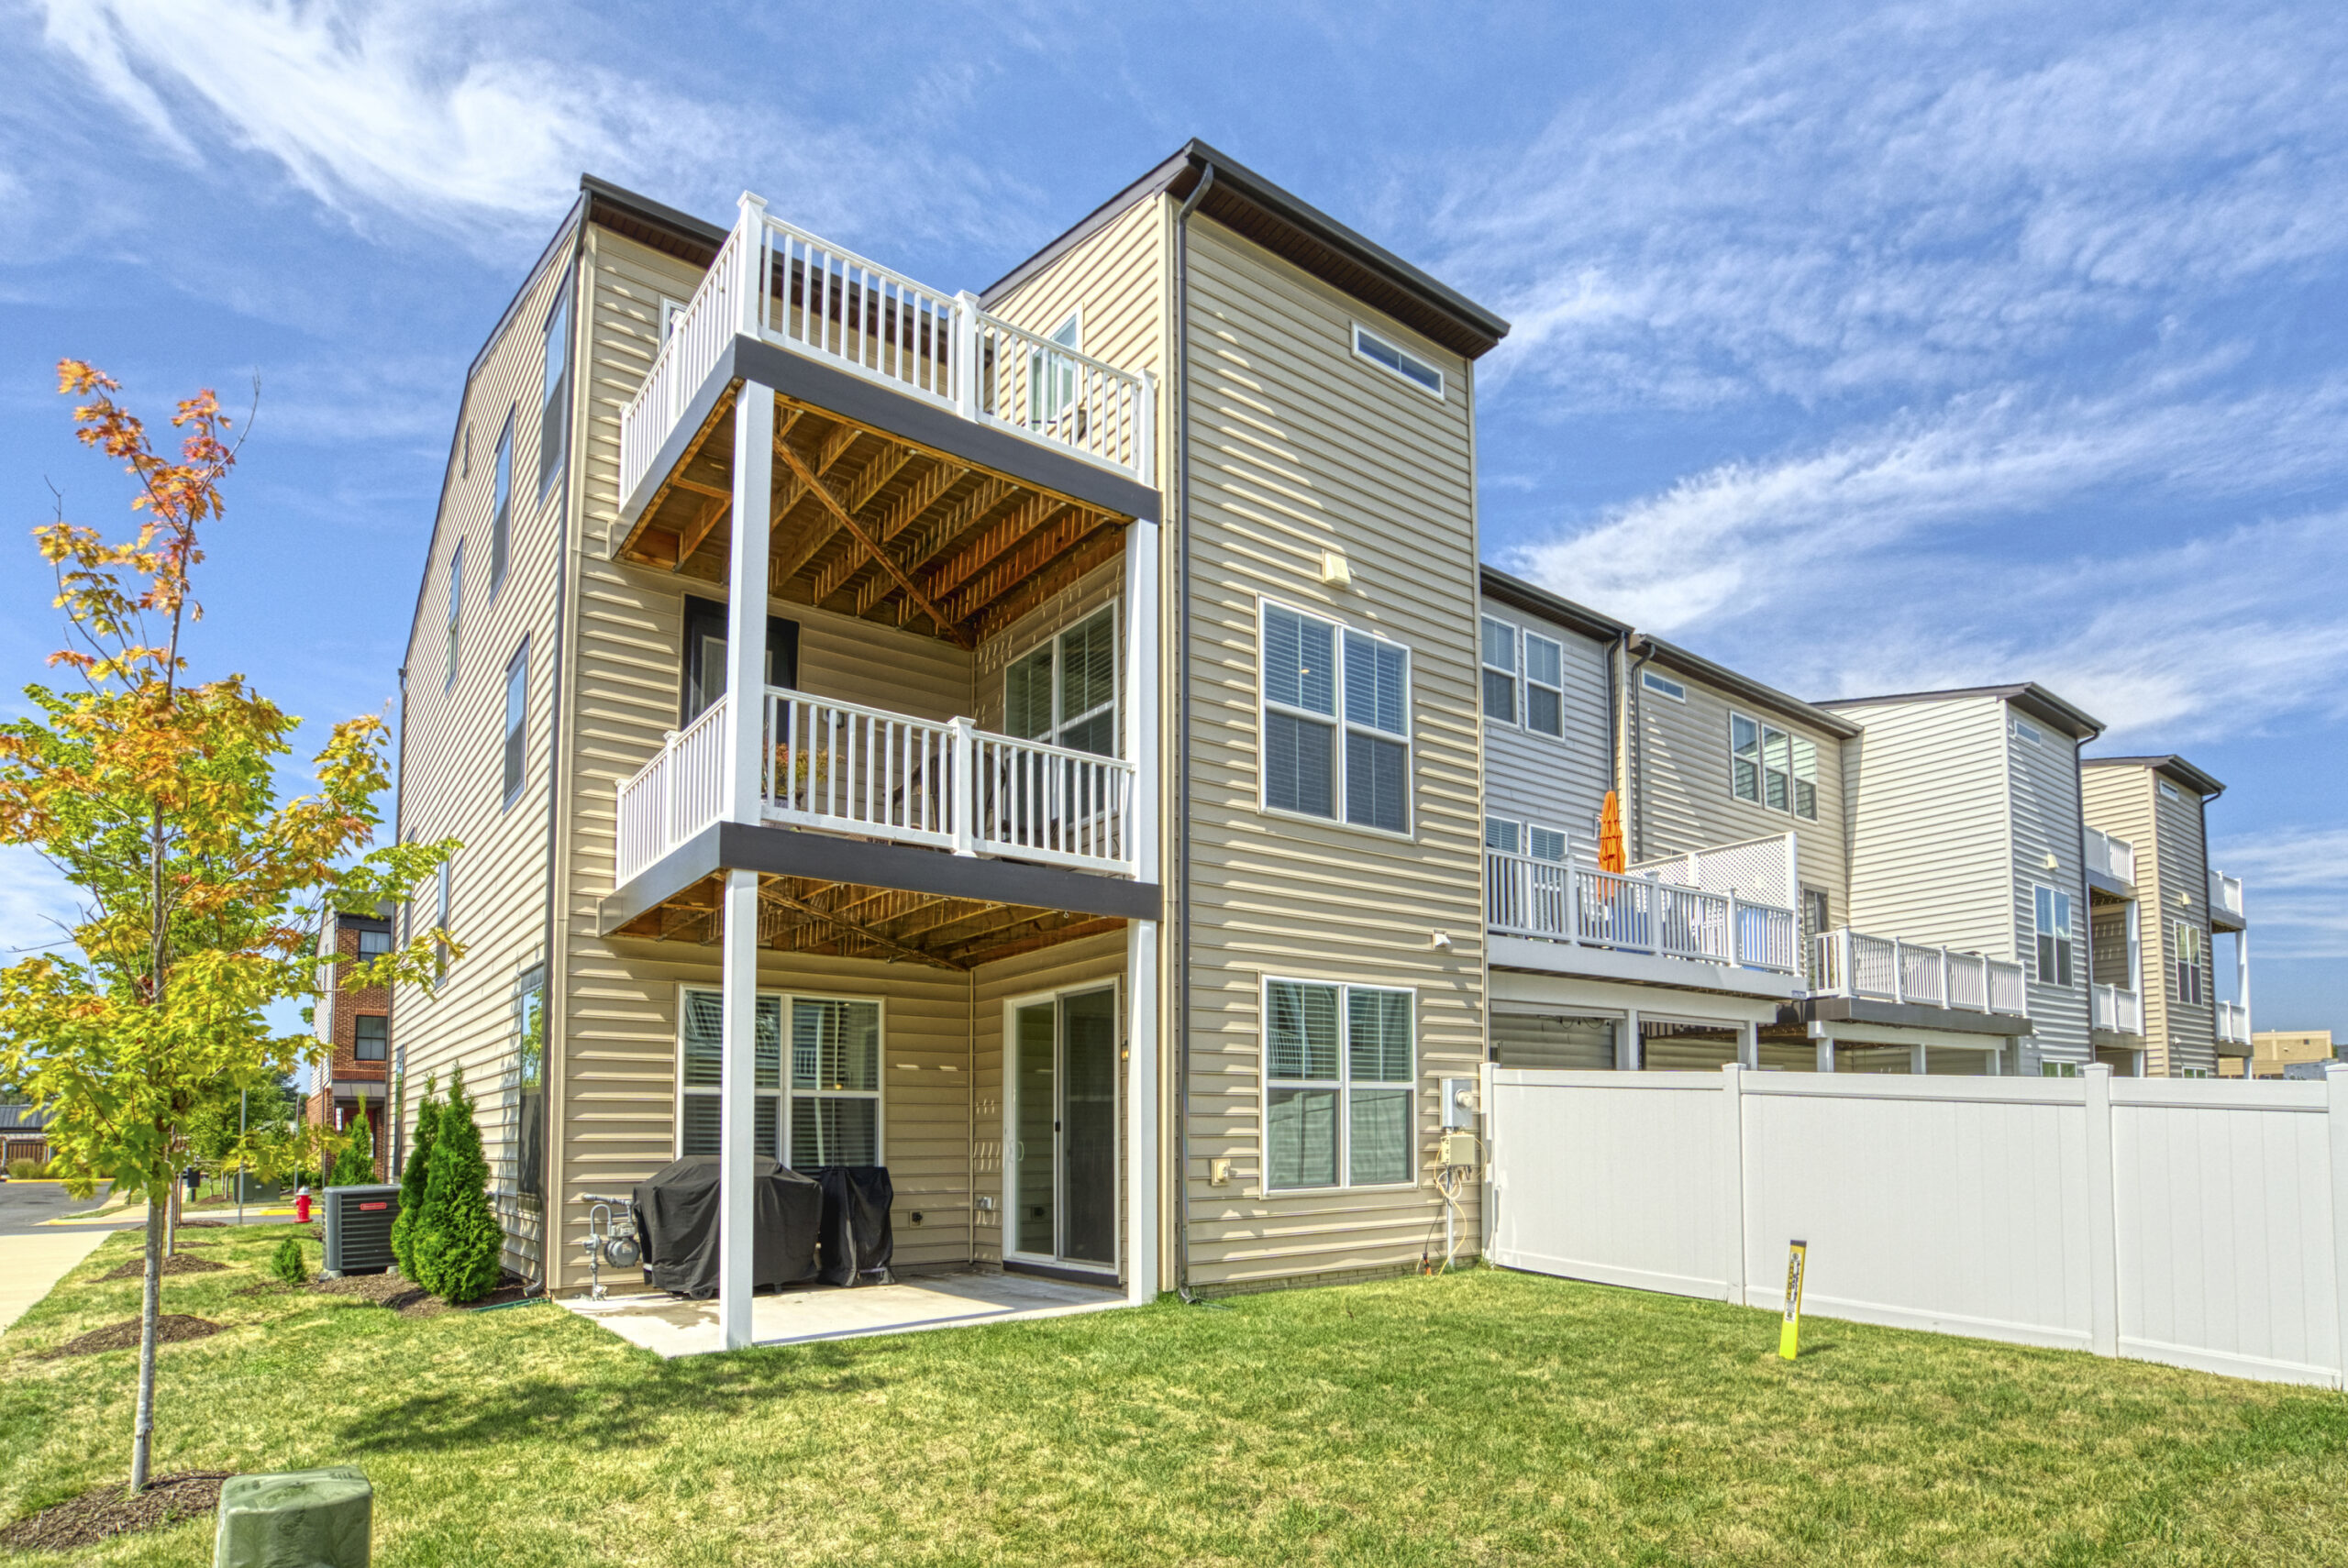 Professional exterior photo of 8109 Zoe Place, Alexandria, VA - Showing the rear of the end unit townhome with 3-level outdoor living space